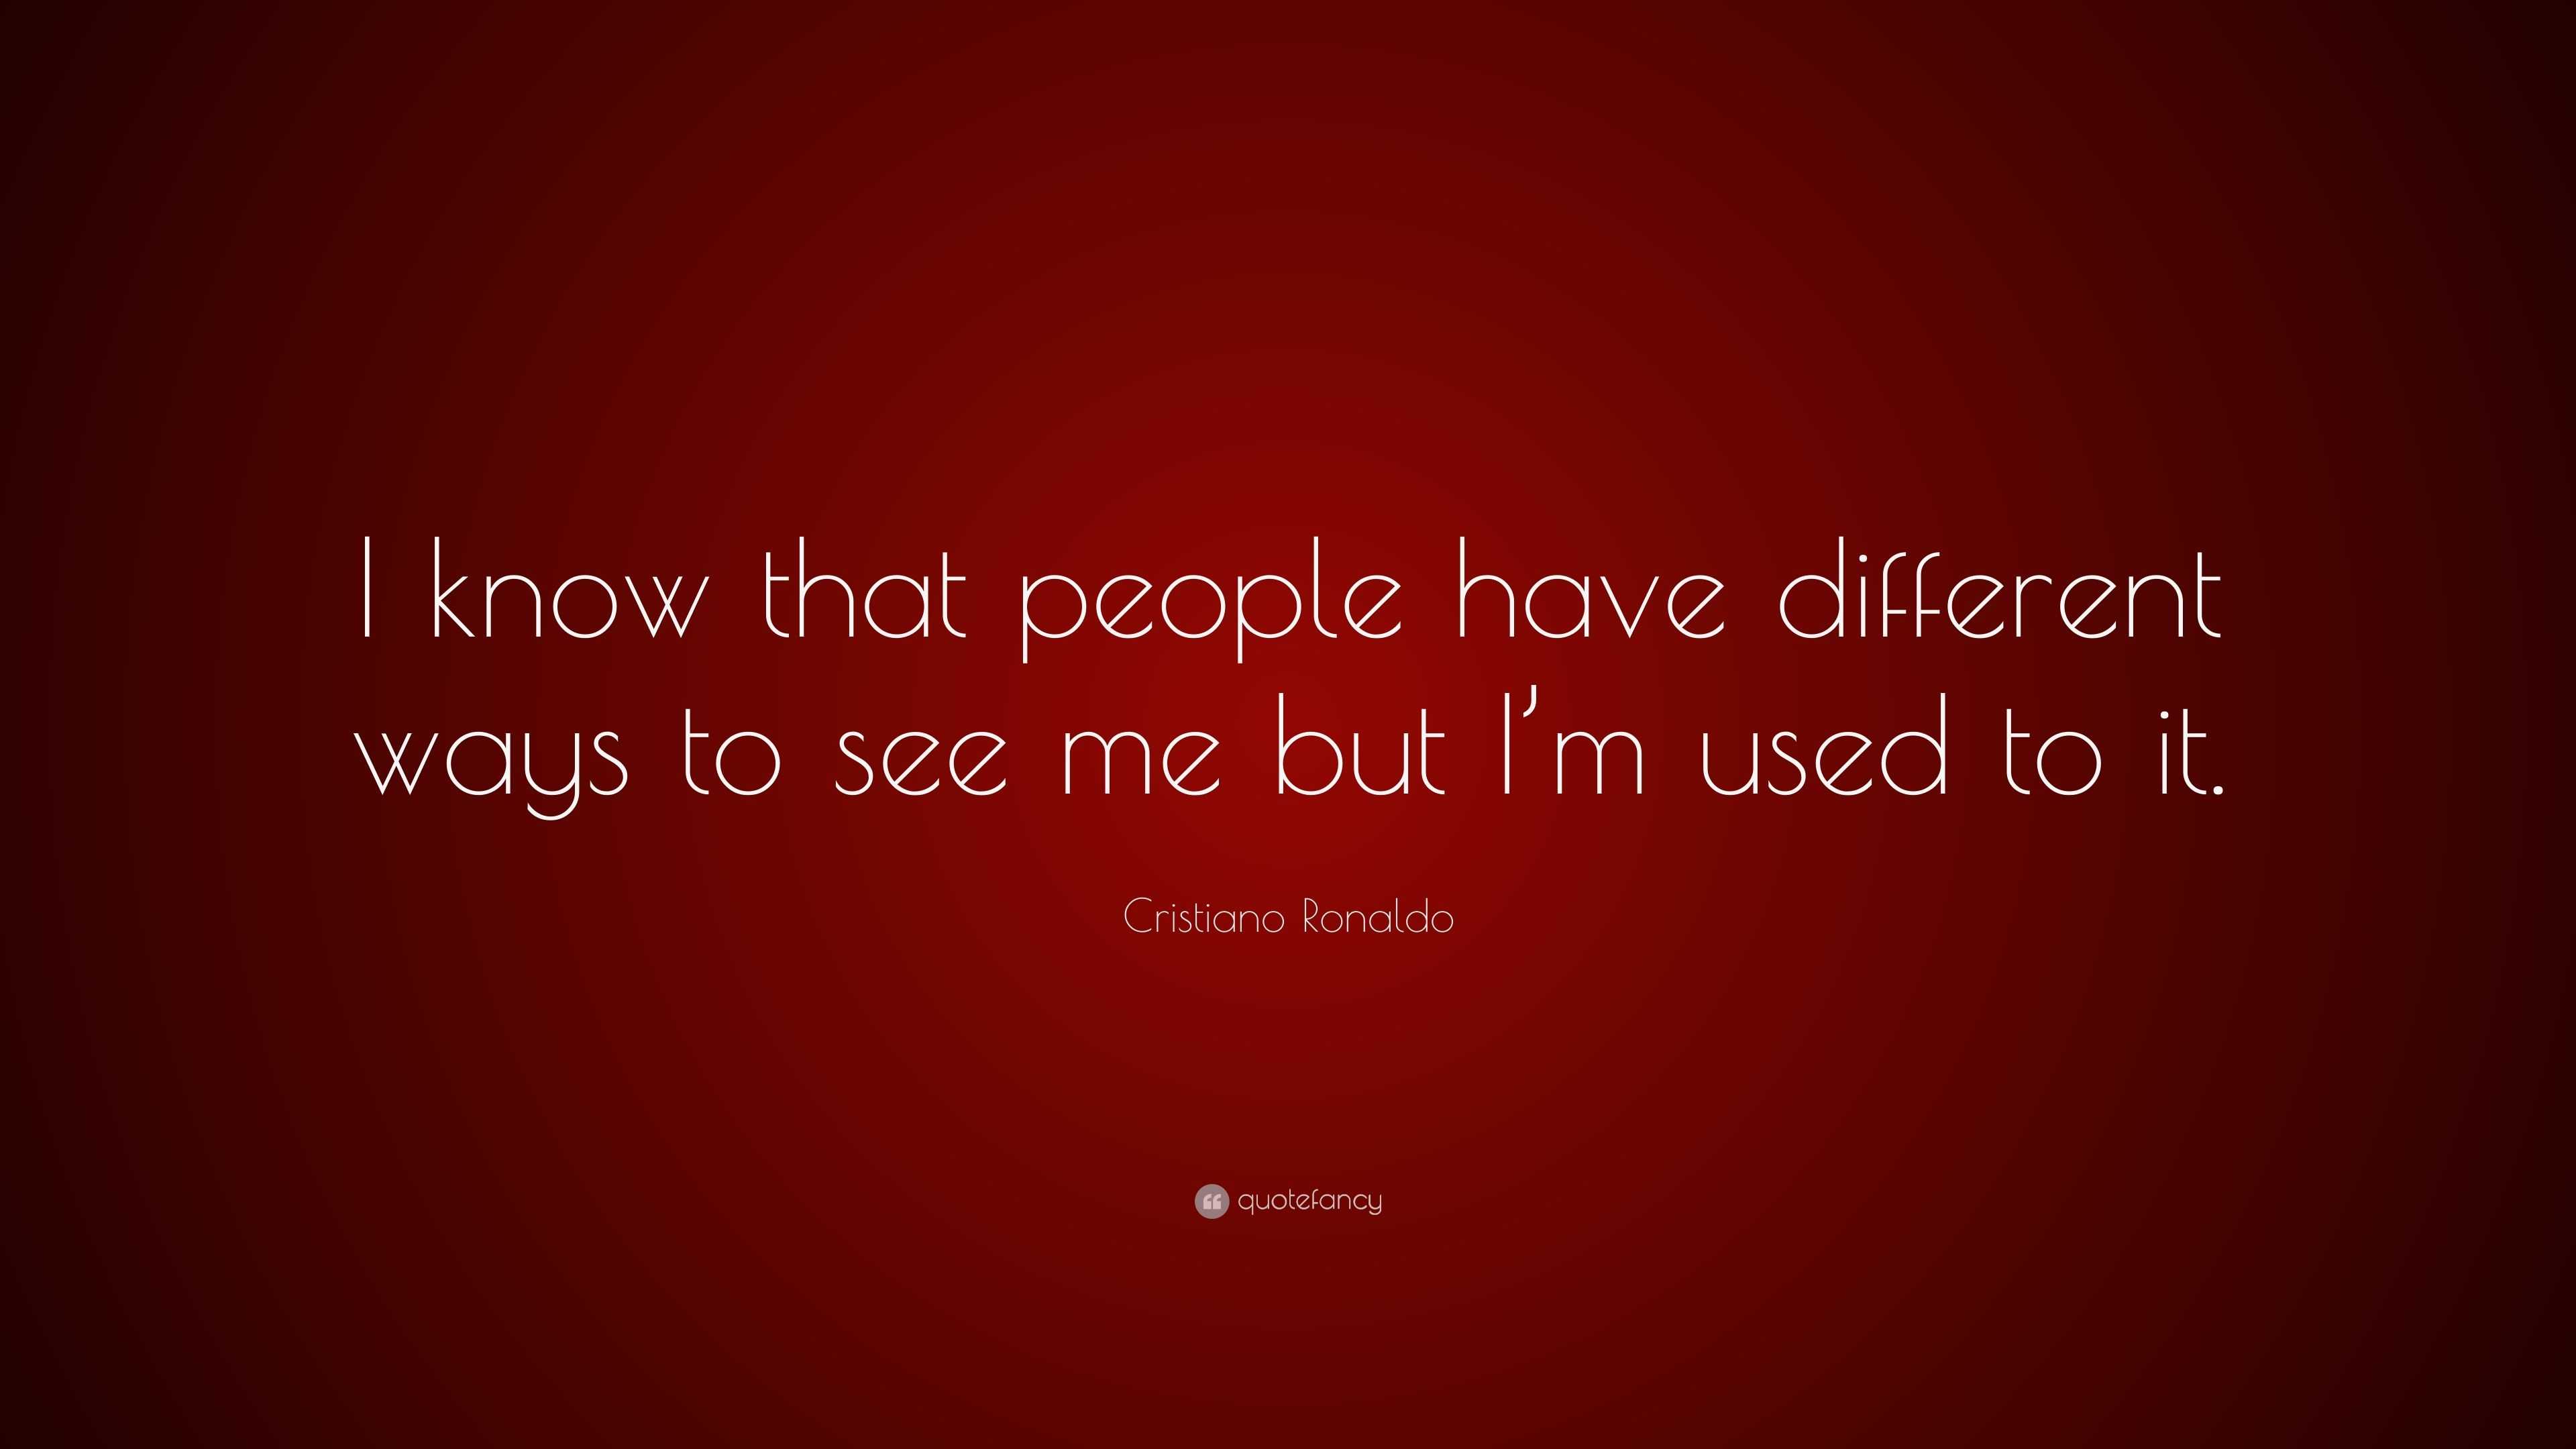 Cristiano Ronaldo Quote: “I know that people have different ways to see ...